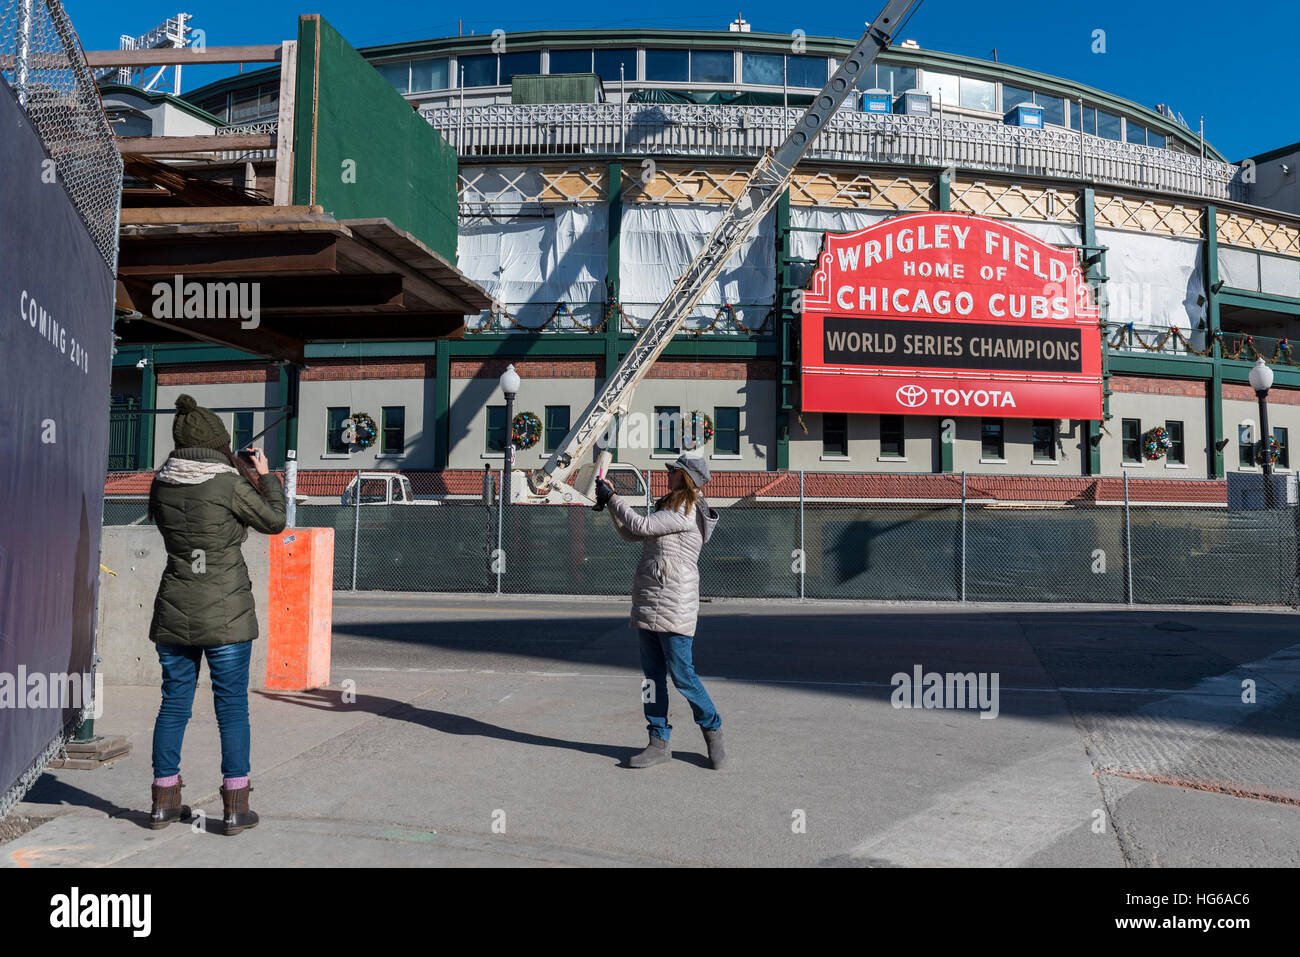 Chicago, USA. 4th Jan, 2017. Tourists view Wrigley Field, the home of baseball's Chicago Cubs, and current World Series Champions, which is currrently undergoing refurbishment and reconstruction. Works include construction of The Hotel Zachary as well as a new retail/entertainment complex at Addison & Clark. © Stephen Chung/Alamy Live News Stock Photo